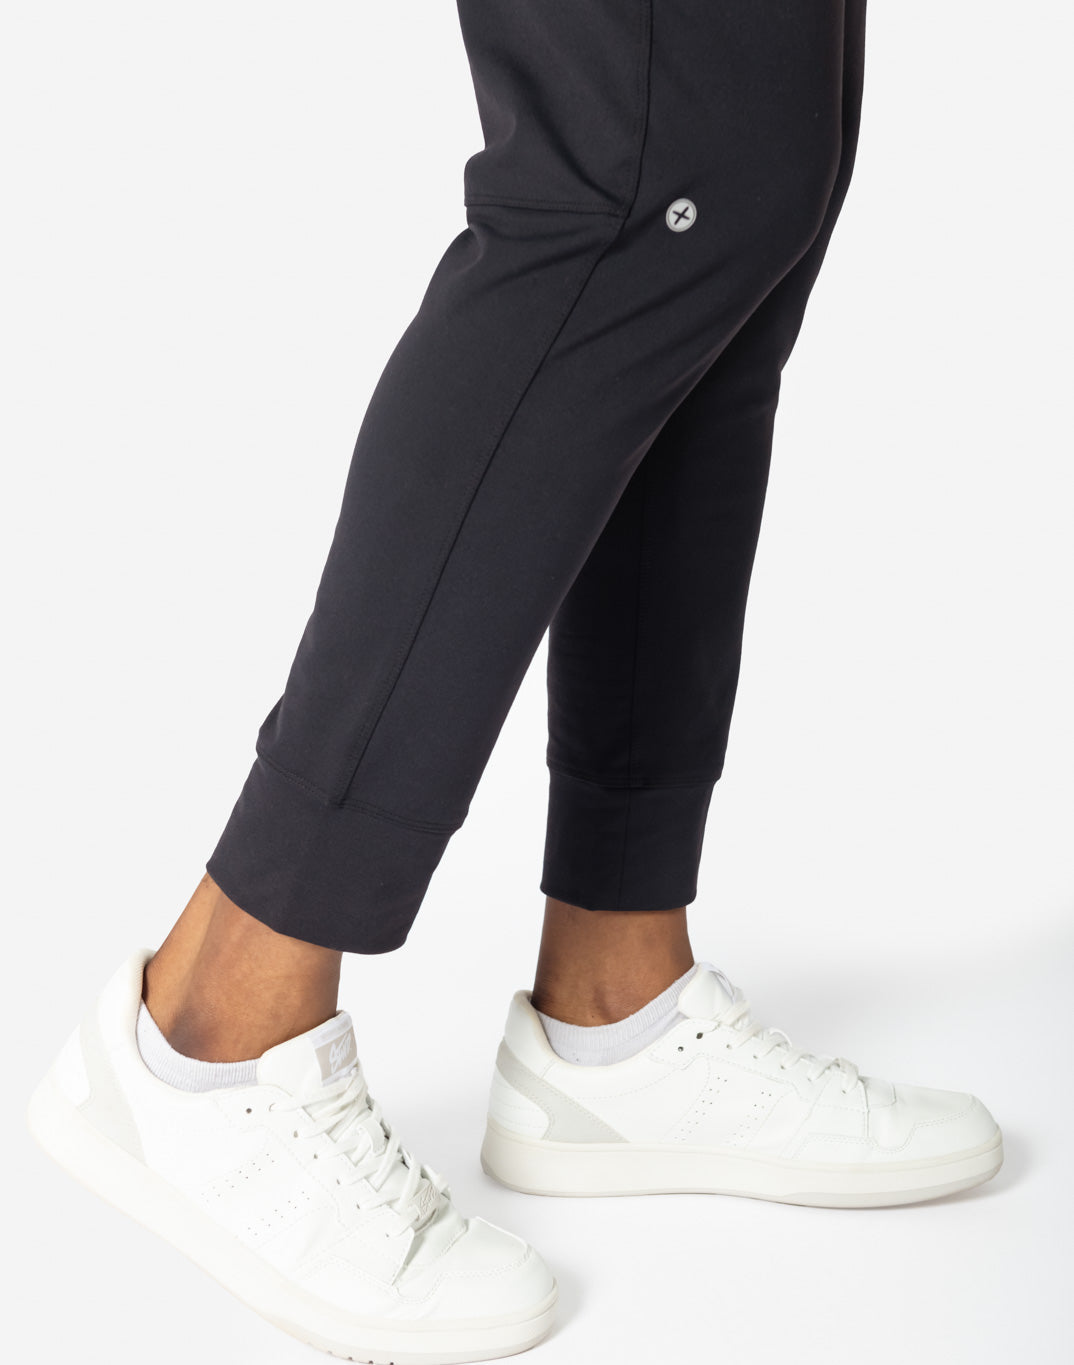 MVP Base Jogger in Black - Joggers - Gym+Coffee IE